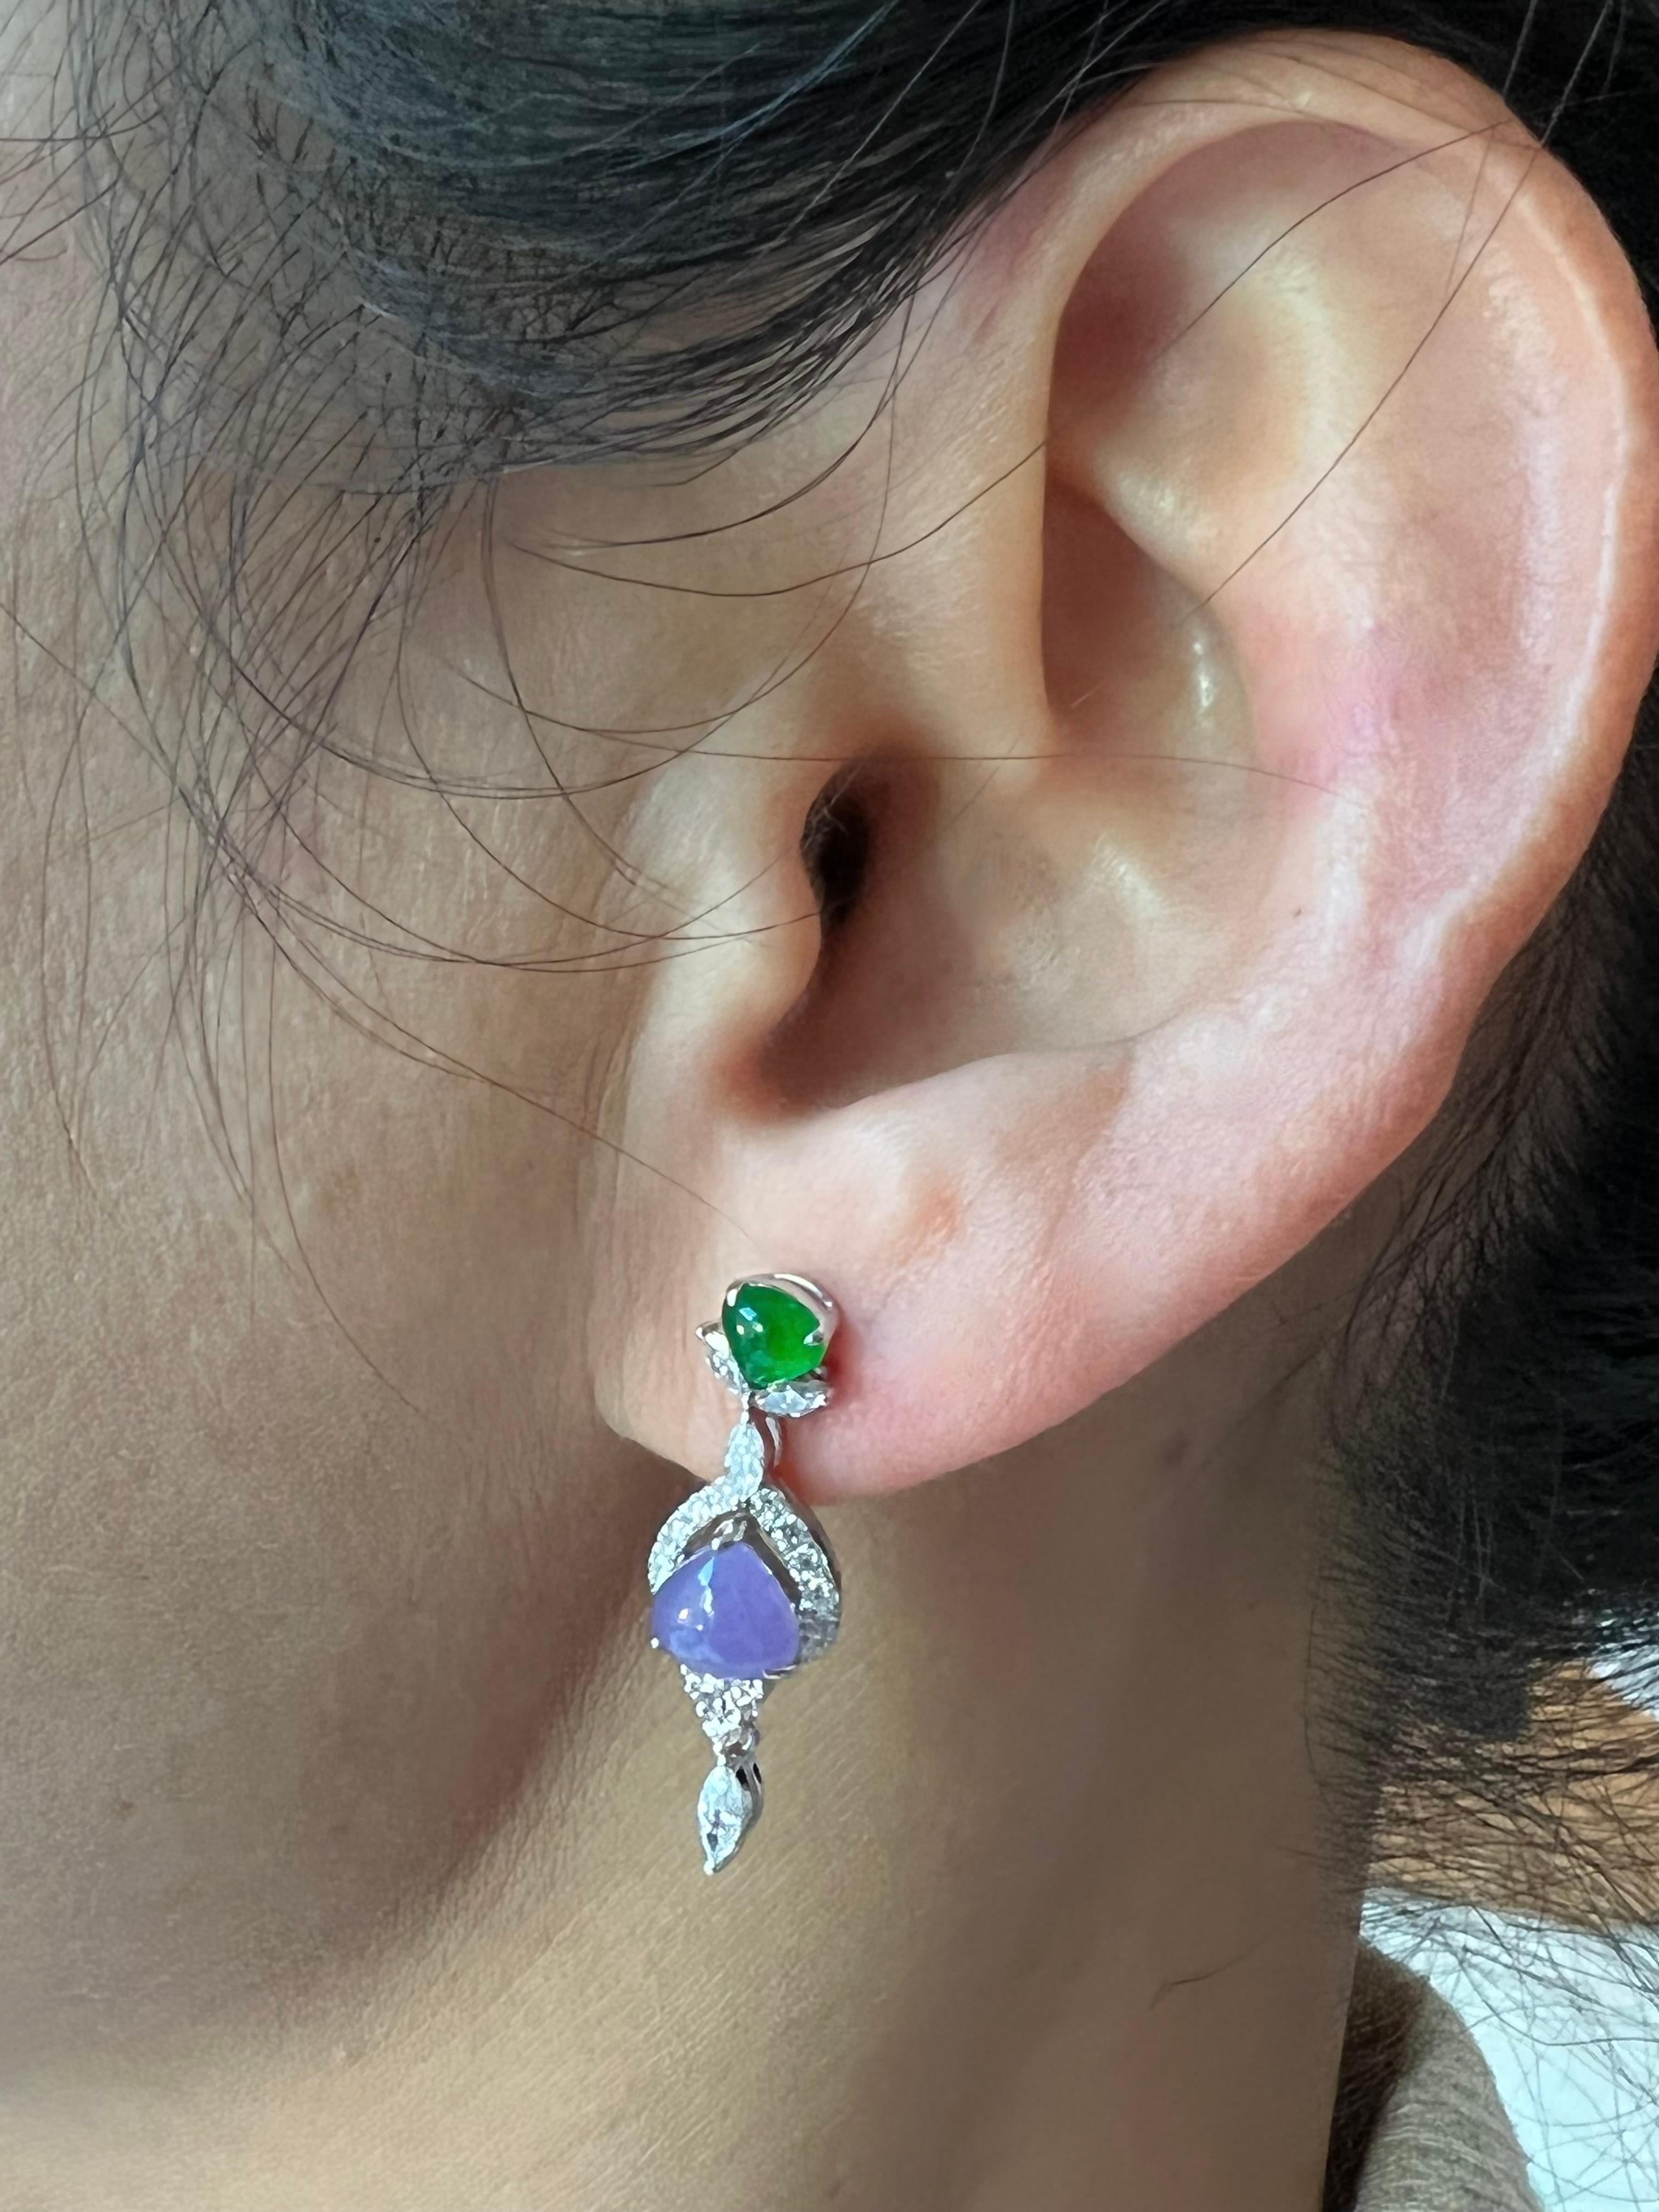 Please check out the HD video. This is a very special pair of drop earrings that are well designed with superb color combination. Certified by 2 labs. The jade materials used are also top notch. The lavender / purple jades in these earrings are